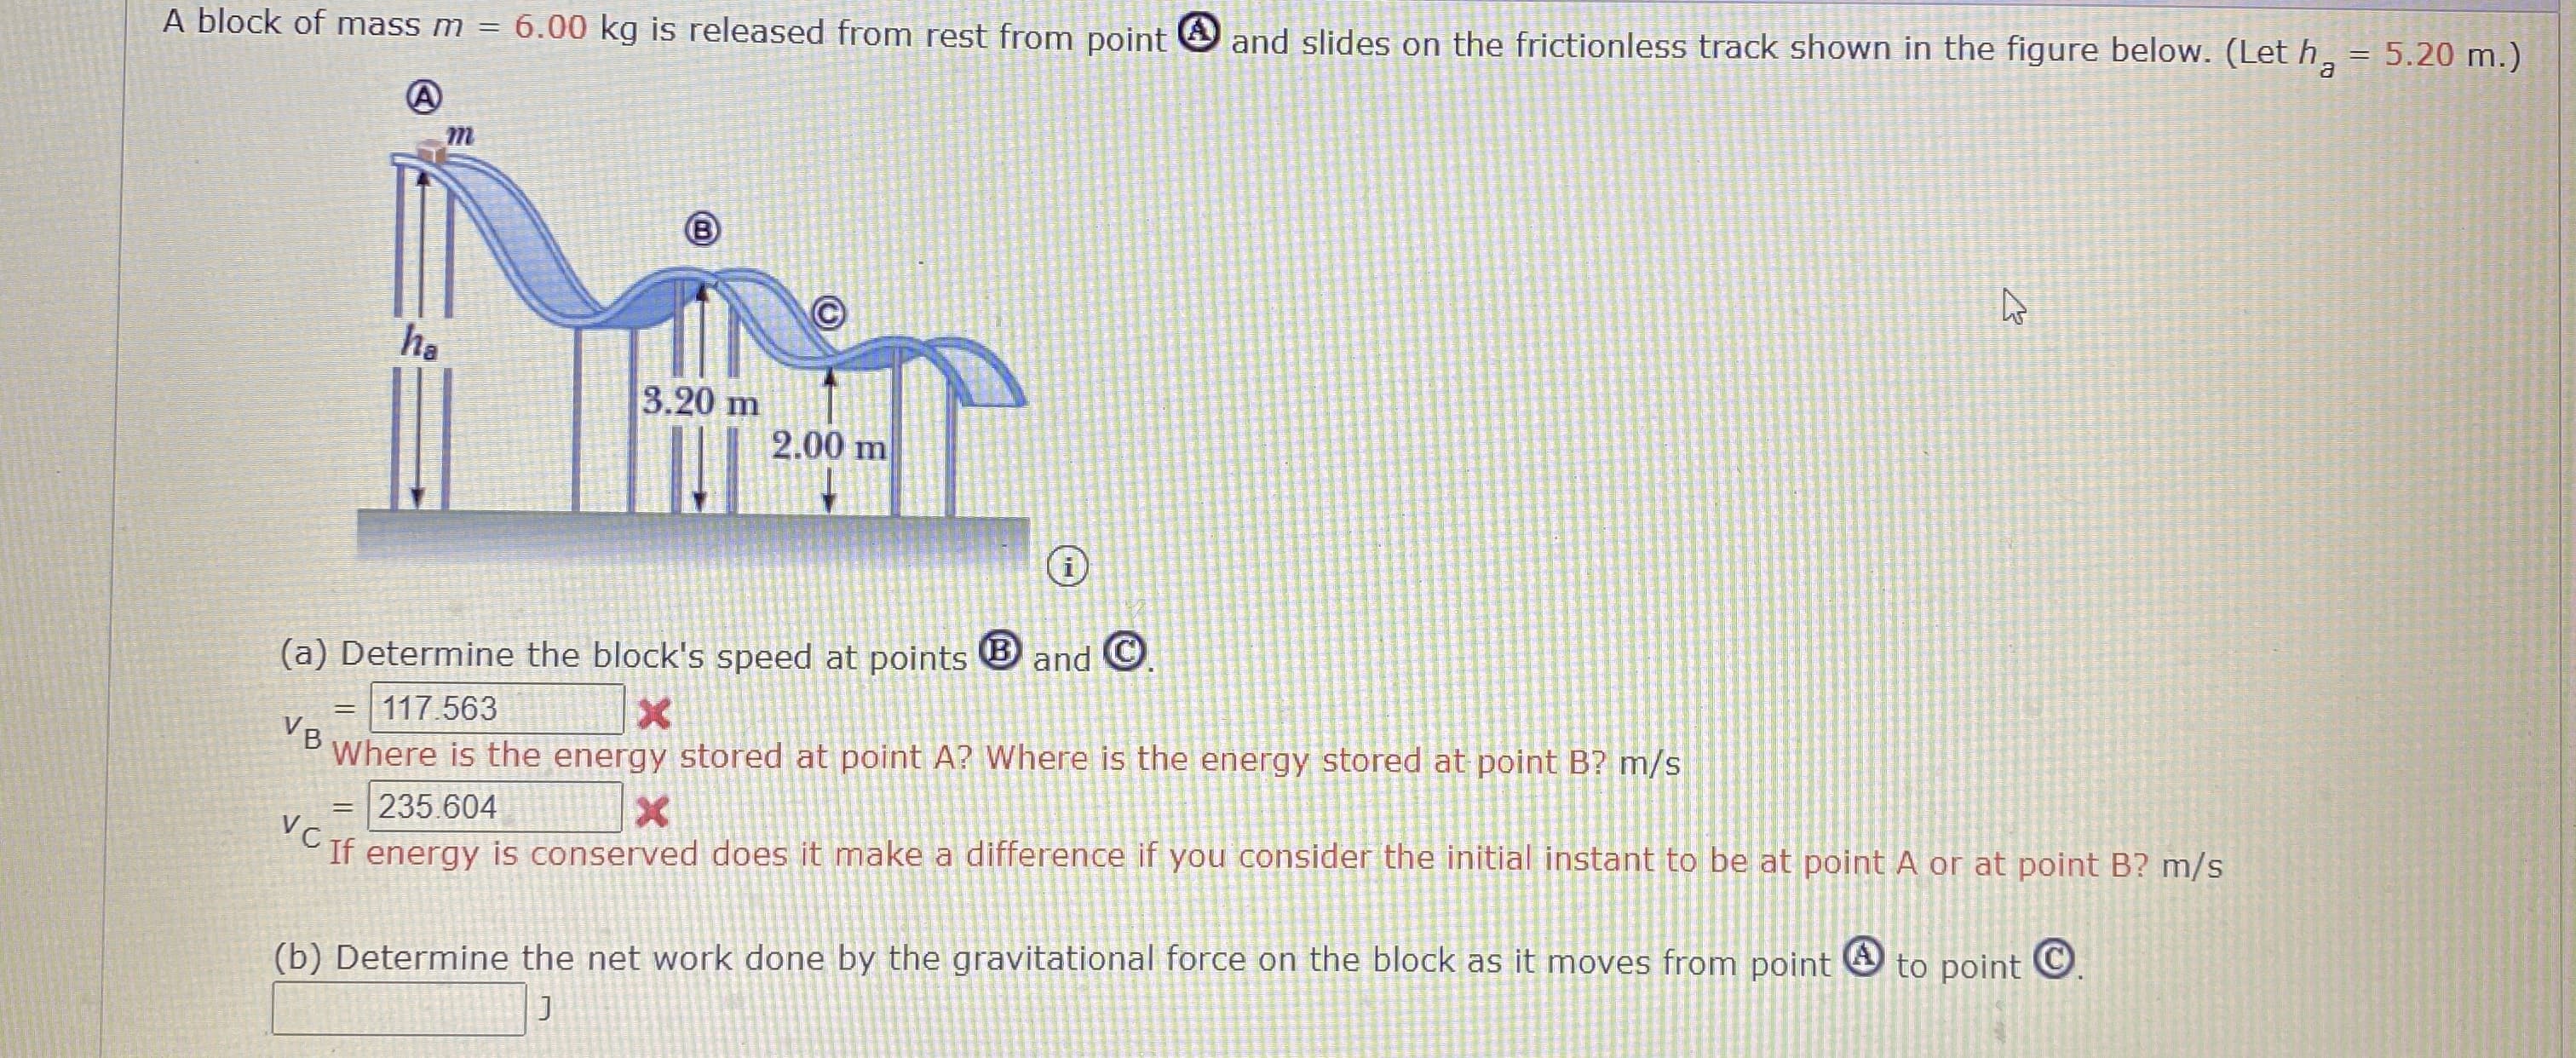 A block of mass m = 6.00 kg is released from rest from point O and slides on the frictionless track shown in the figure below. (Let h,
= 5.20 m.)
ha
3.20 m
2.00 m
(a) Determine the block's speed at points
and O
